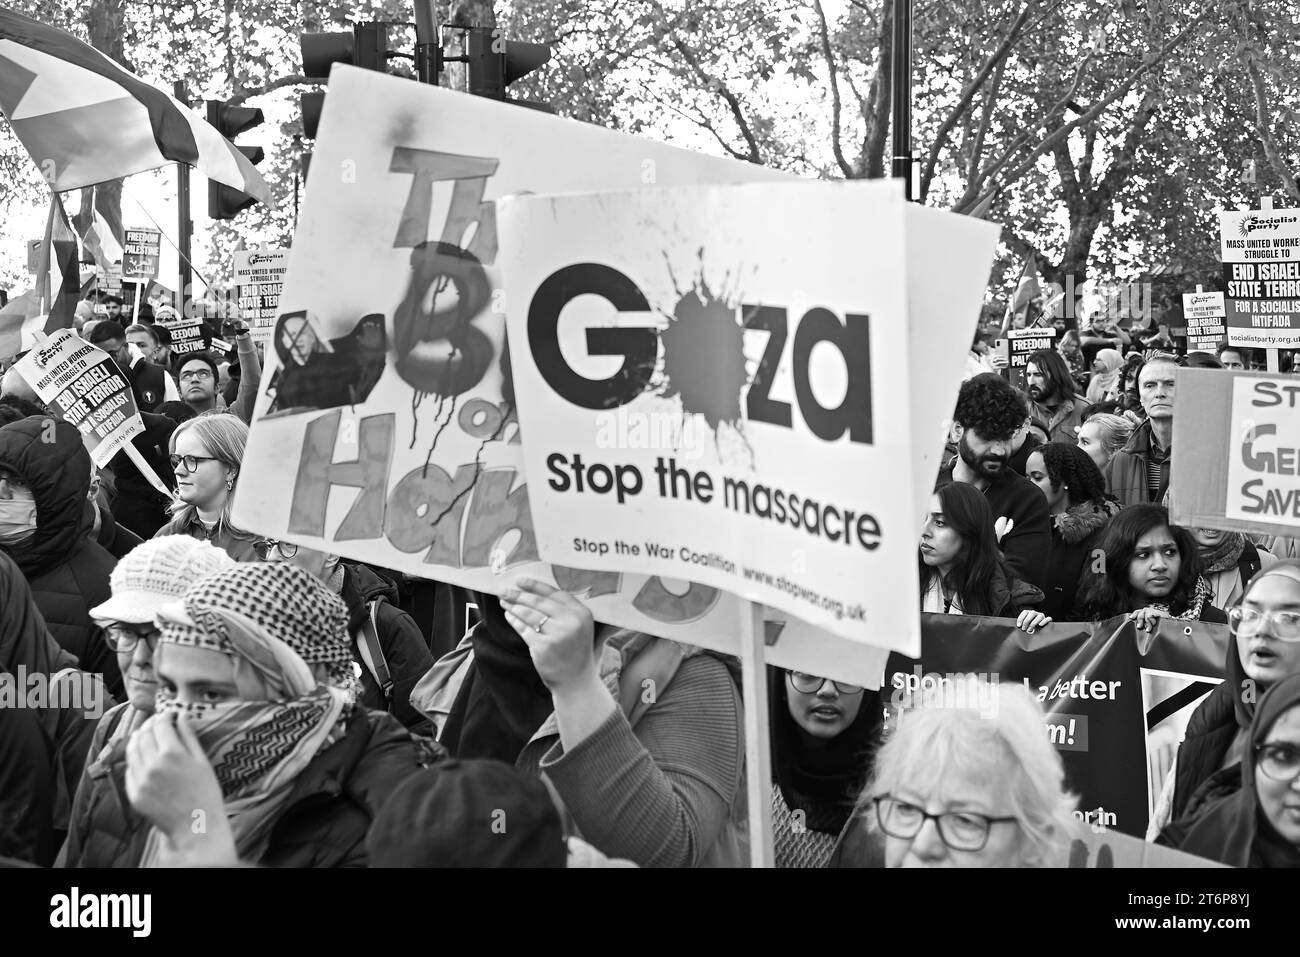 London's pro Palestine march protesters meet up in Hyde Park midday Saturday 11 November 2023 to march in demonstration against the bombs in GAZA that have killed 1000's of civilians in retaliation of the Hamas slaughter of at least 1200 innocent civilians .Police estimate around 300.000 protesters calling for a Gaza  ceasefire marched in central London today it's the biggest UK rally since the Israel-Gaza war began .More than 100 counter protesters have been arrested ,near the protest route .Officers faced aggression from some counter protesters including some far right groups ... Stock Photo